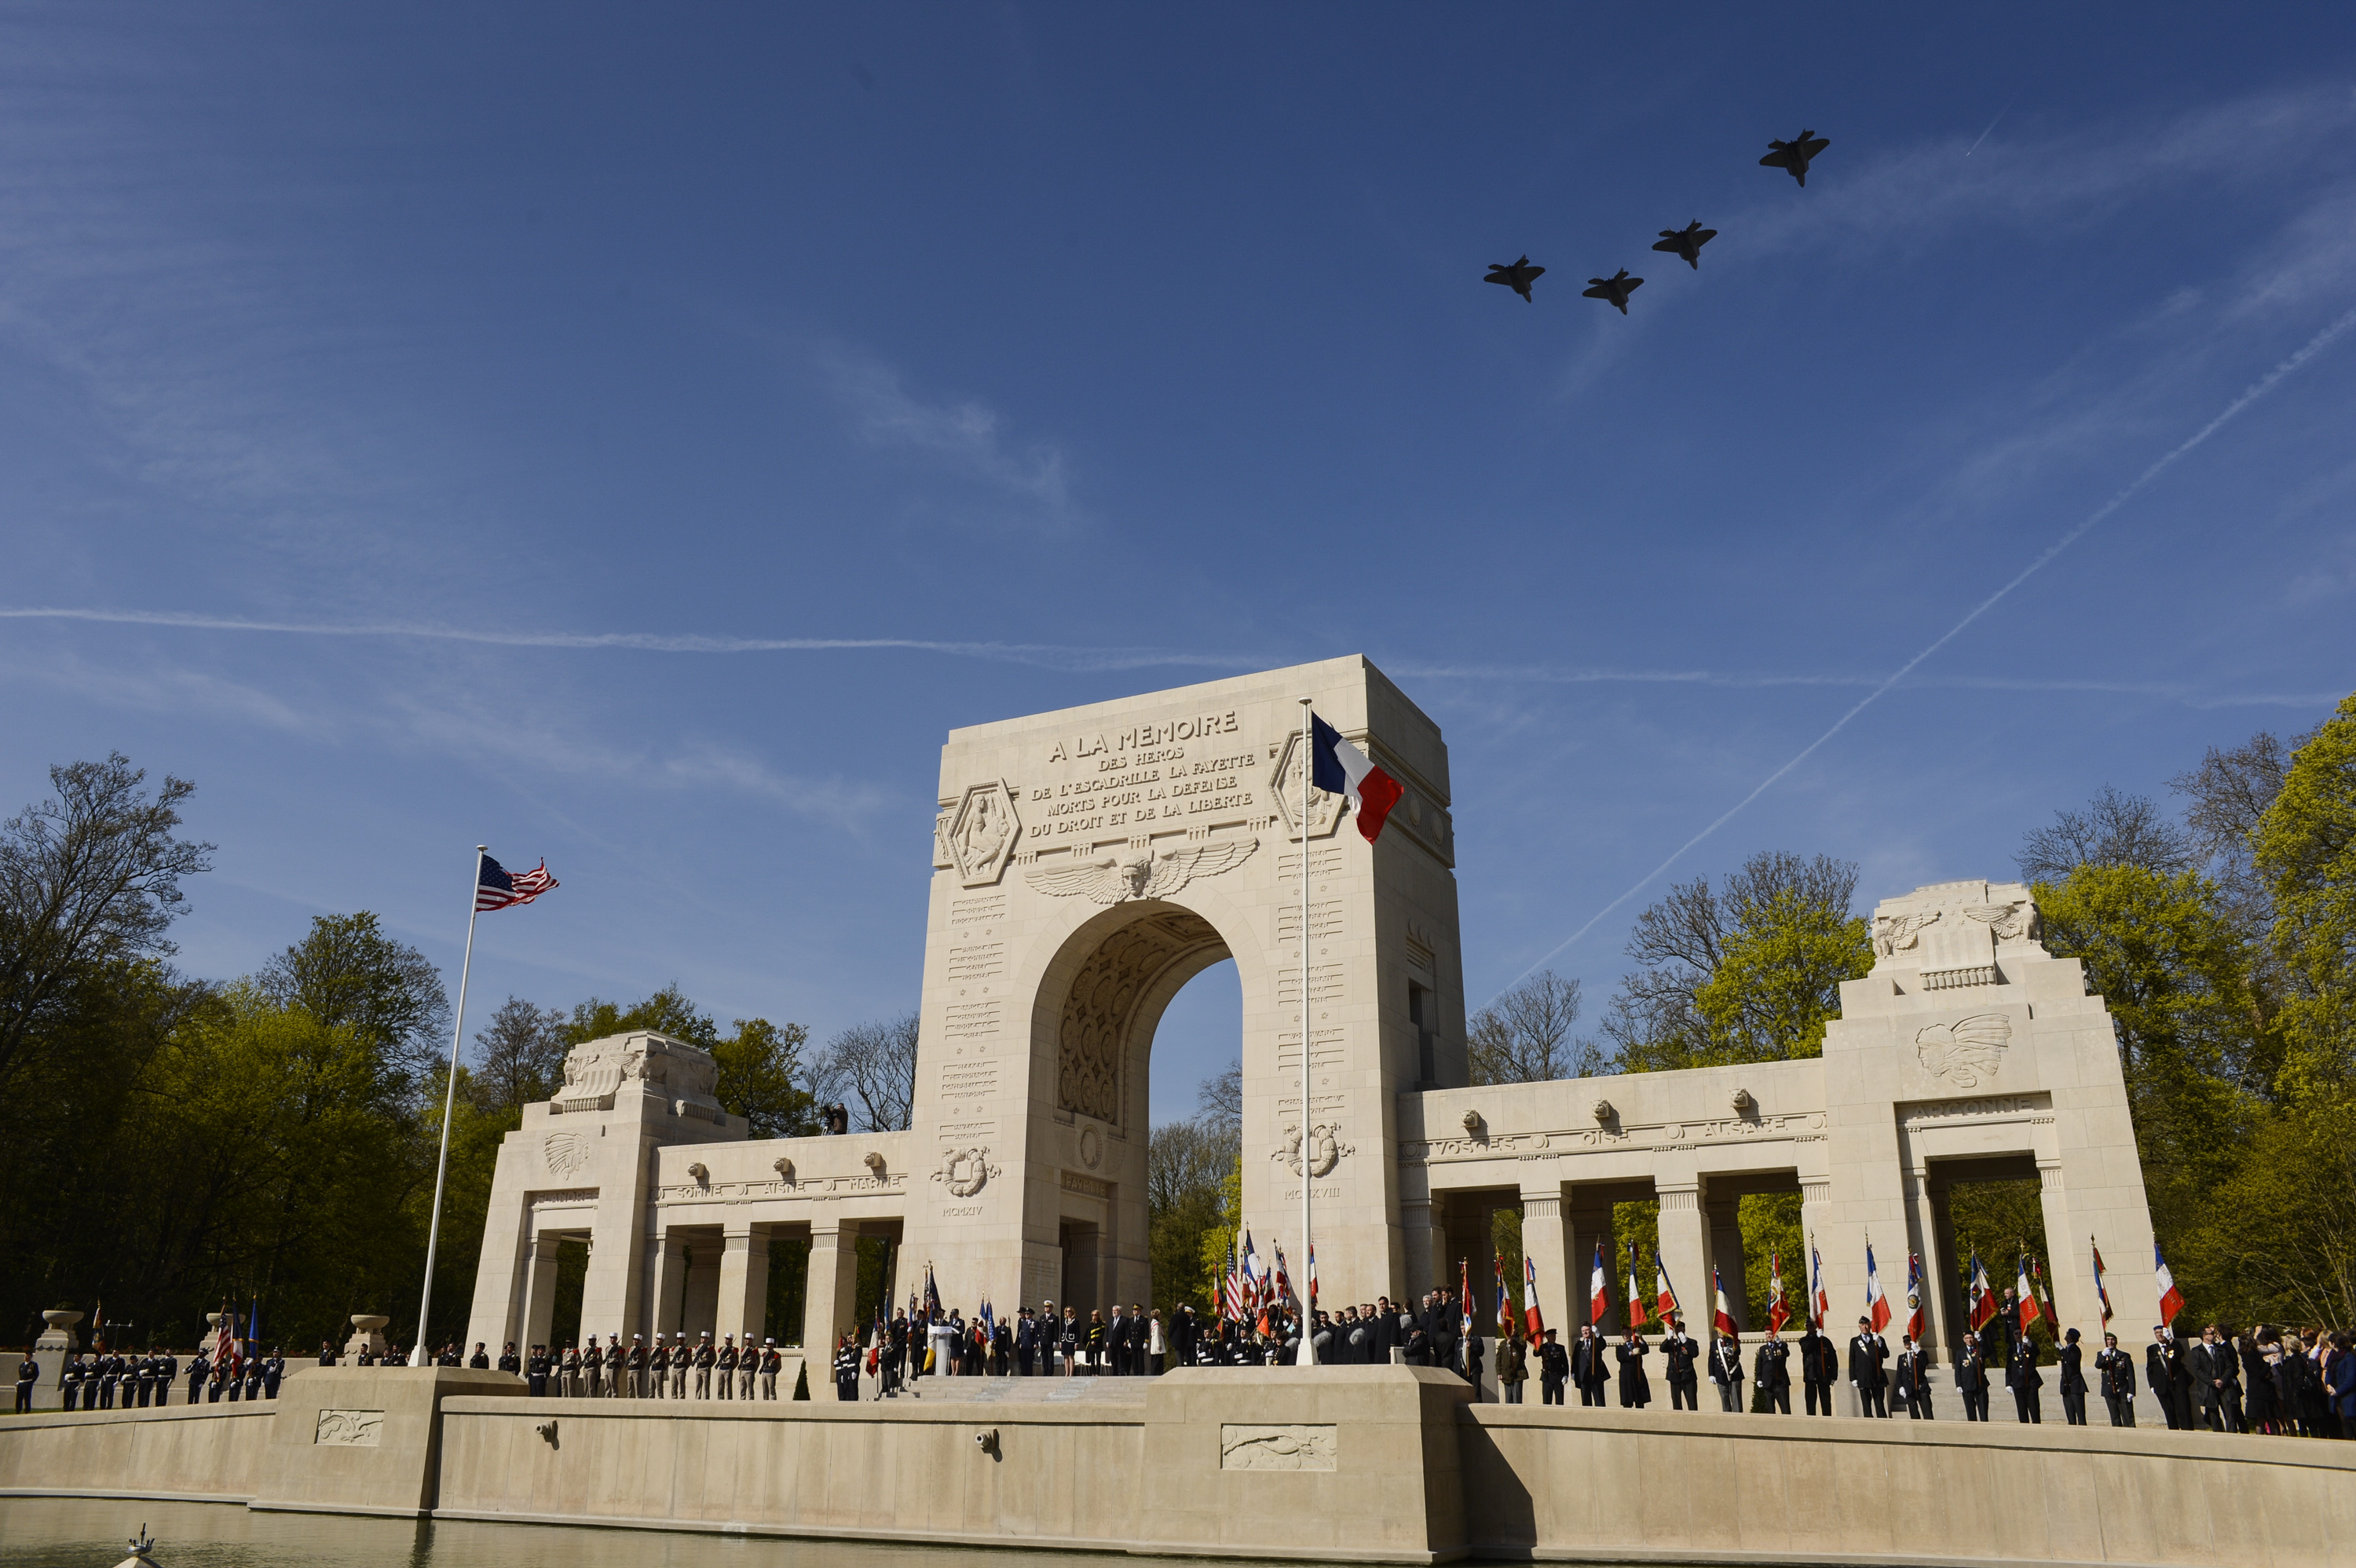 Four U.S. Air Force F-22 Raptor fifth generation fighters fly over the Lafayette Escadrille Memorial in Marnes-la-Coquette, France, April 20, 2016, during a ceremony honoring the 268 Americans who joined the French Air Force before the U.S. officially engaged in World War I. In addition to the F-22s, a USAF B-52 Stratofortress bomber, three FAF Mirage 2000Ns, one FAF Rafale and a World War I-era Stearman PT-17 biplane performed flyovers during the ceremony commemorating the 100th anniversary of the Layfette Escadrille’s formation. Men of the Lafayette Escadrille and Lafayette Flying Crops were critical to the formation of the U.S. Air Force. (U.S. Air Force Photo by Tech. Sgt. Joshua DeMotts/Released)